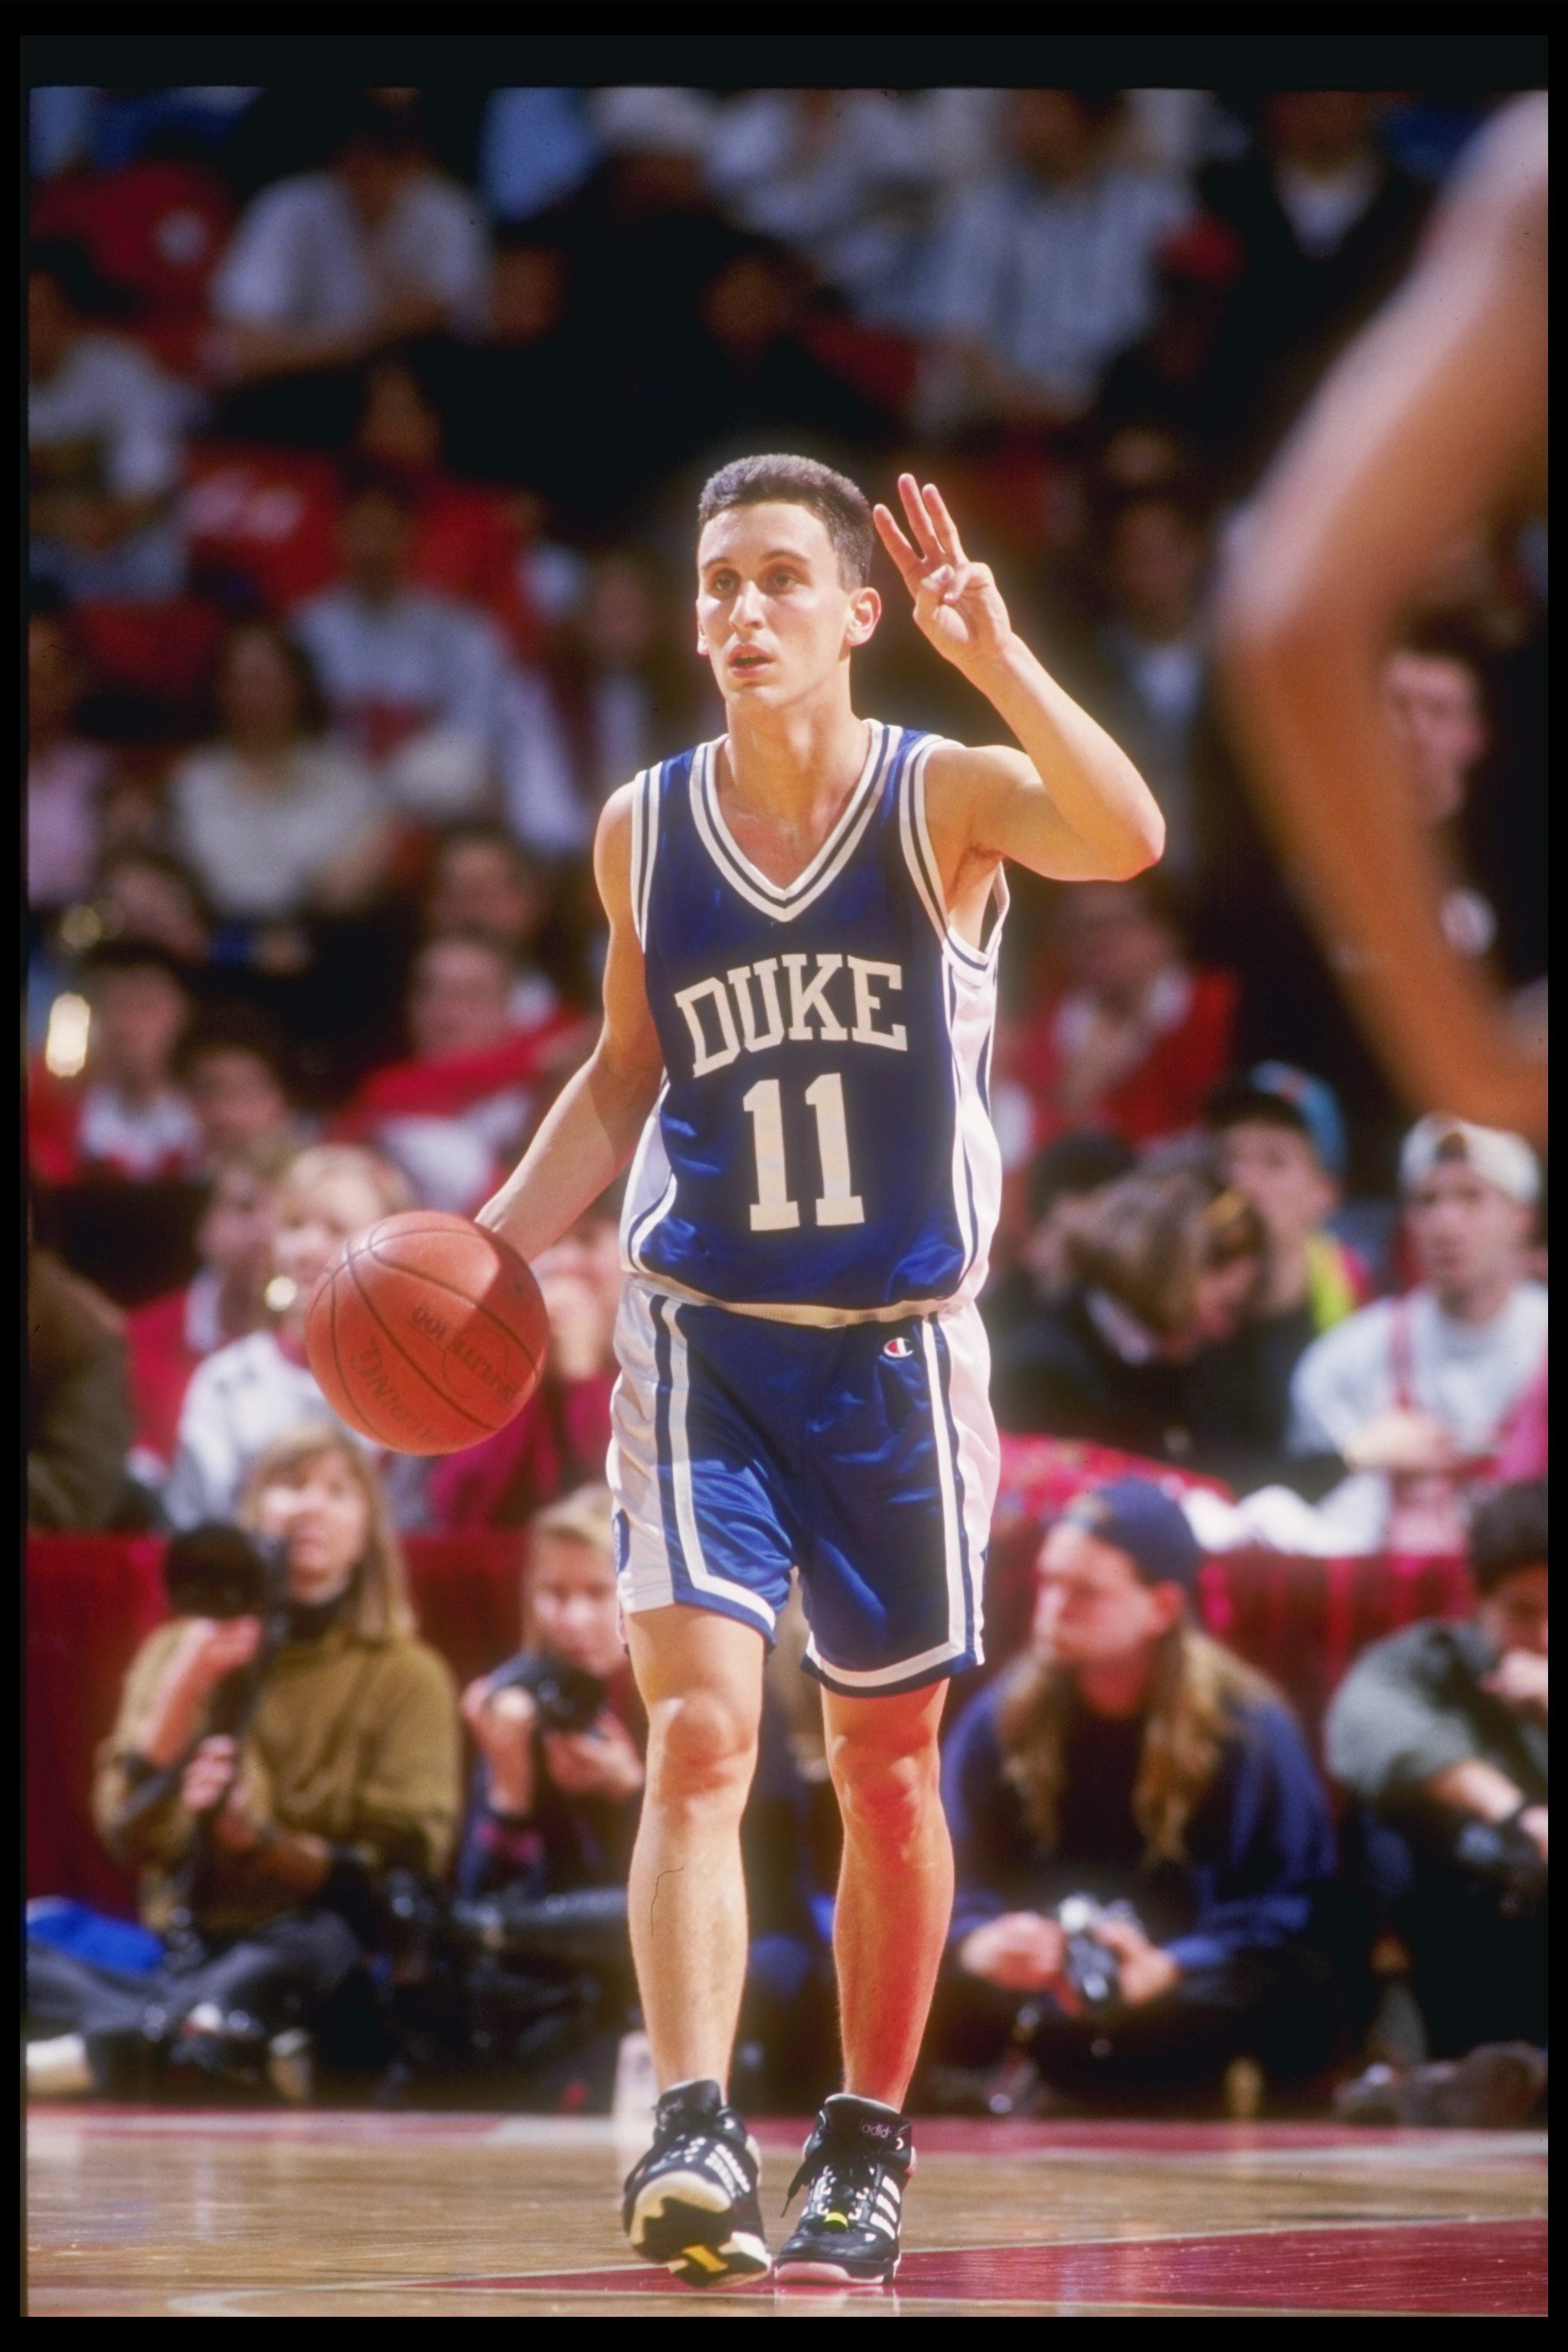 Bobby Hurley reflects on Duke's journey to win its first NCAA title